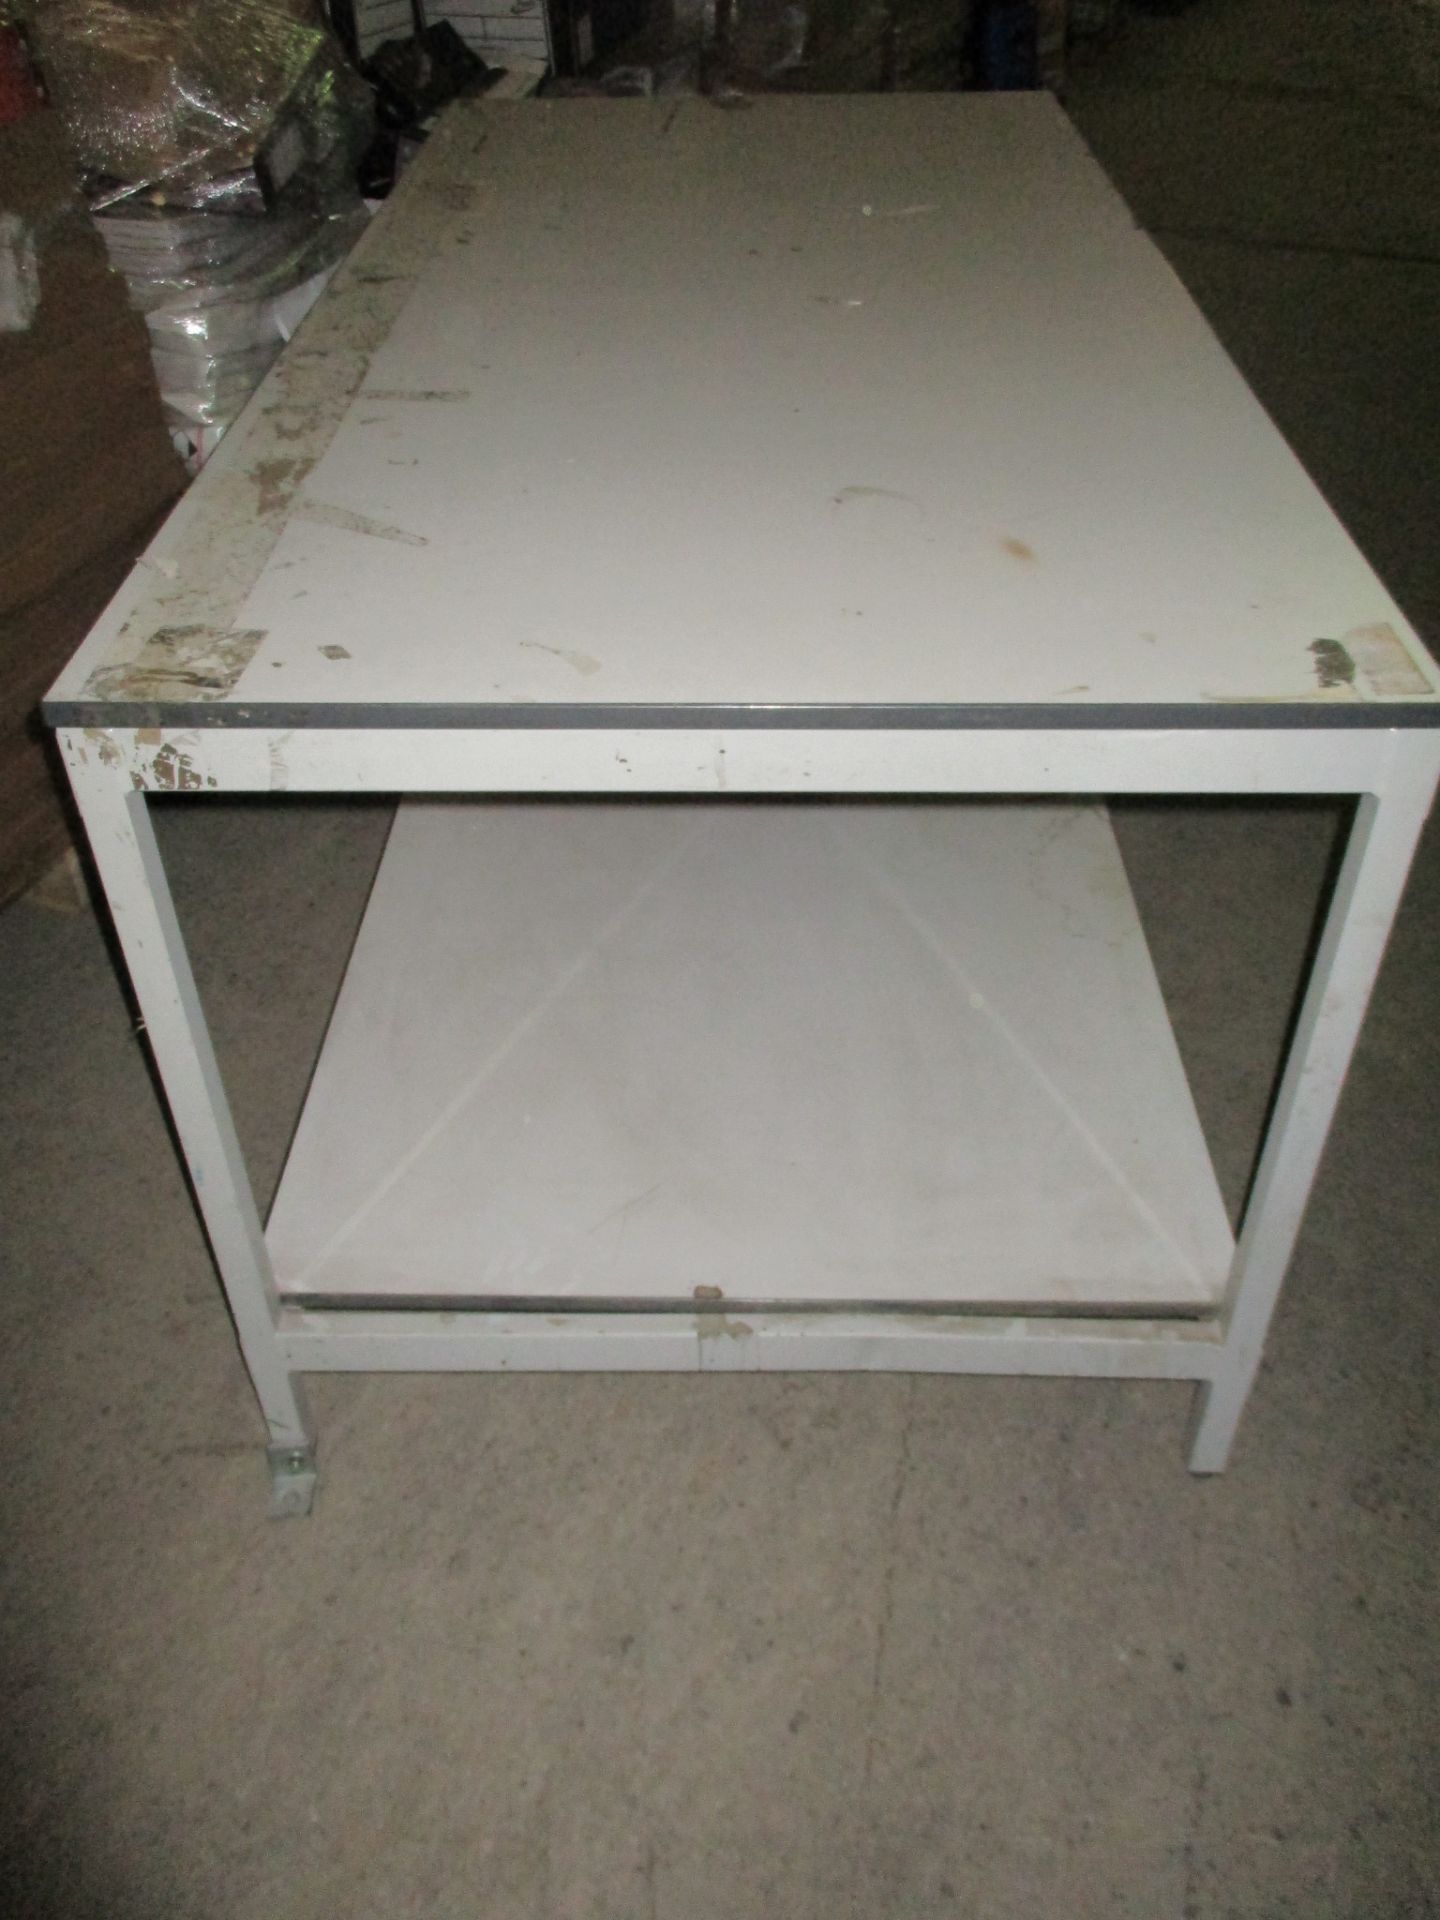 Workwise Work Bench (L-1800mm, D-900mm, H-830mm) - Image 2 of 2